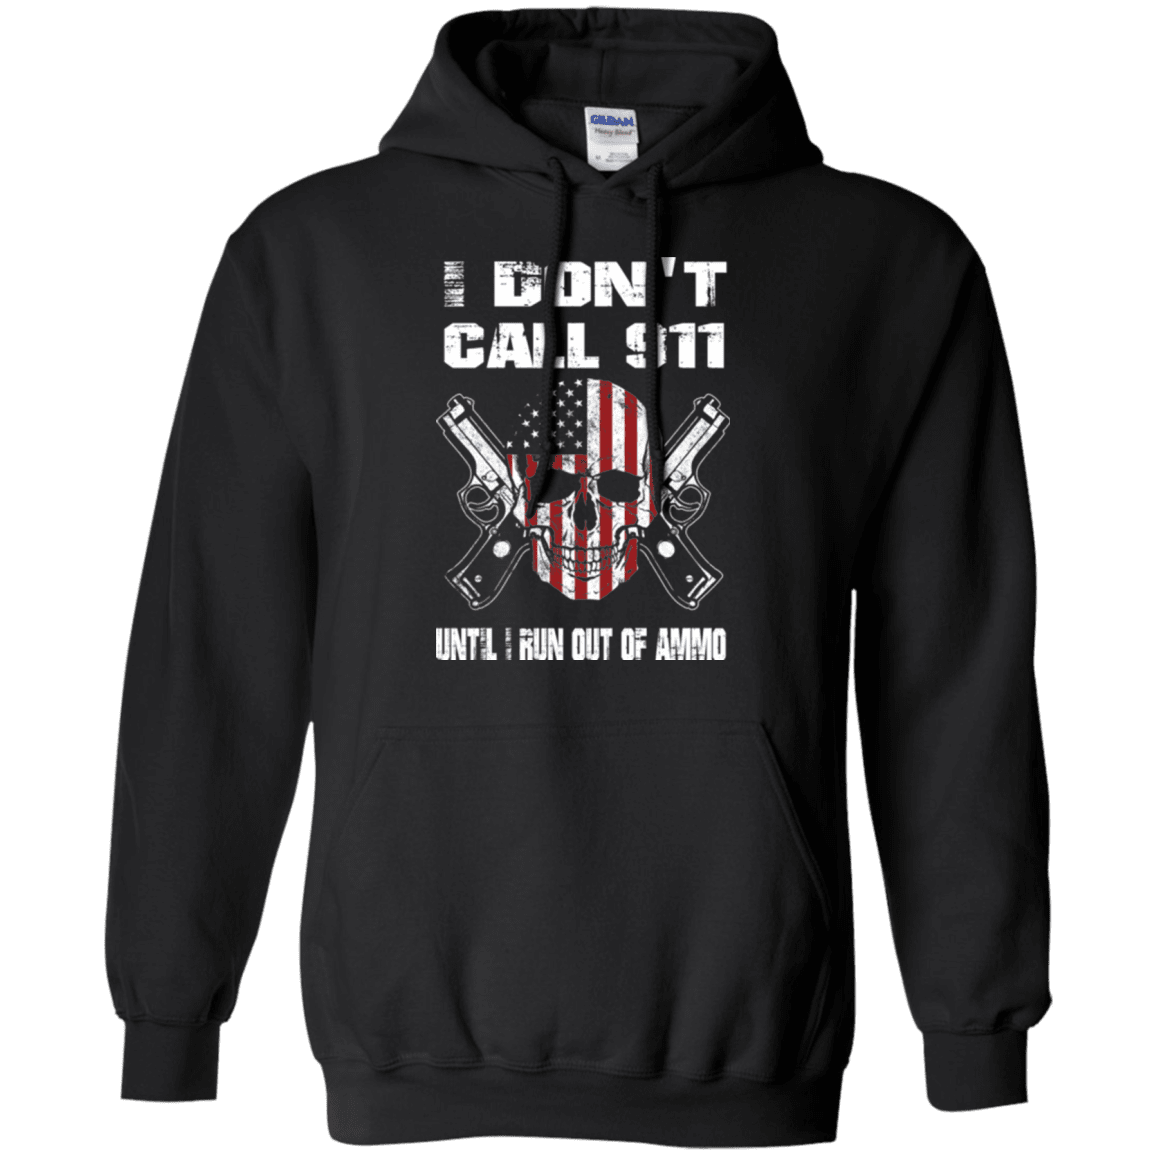 Military T-Shirt "I DON'T CALL 911 UNTIL I RUN OUT OF AMMO"-TShirt-General-Veterans Nation